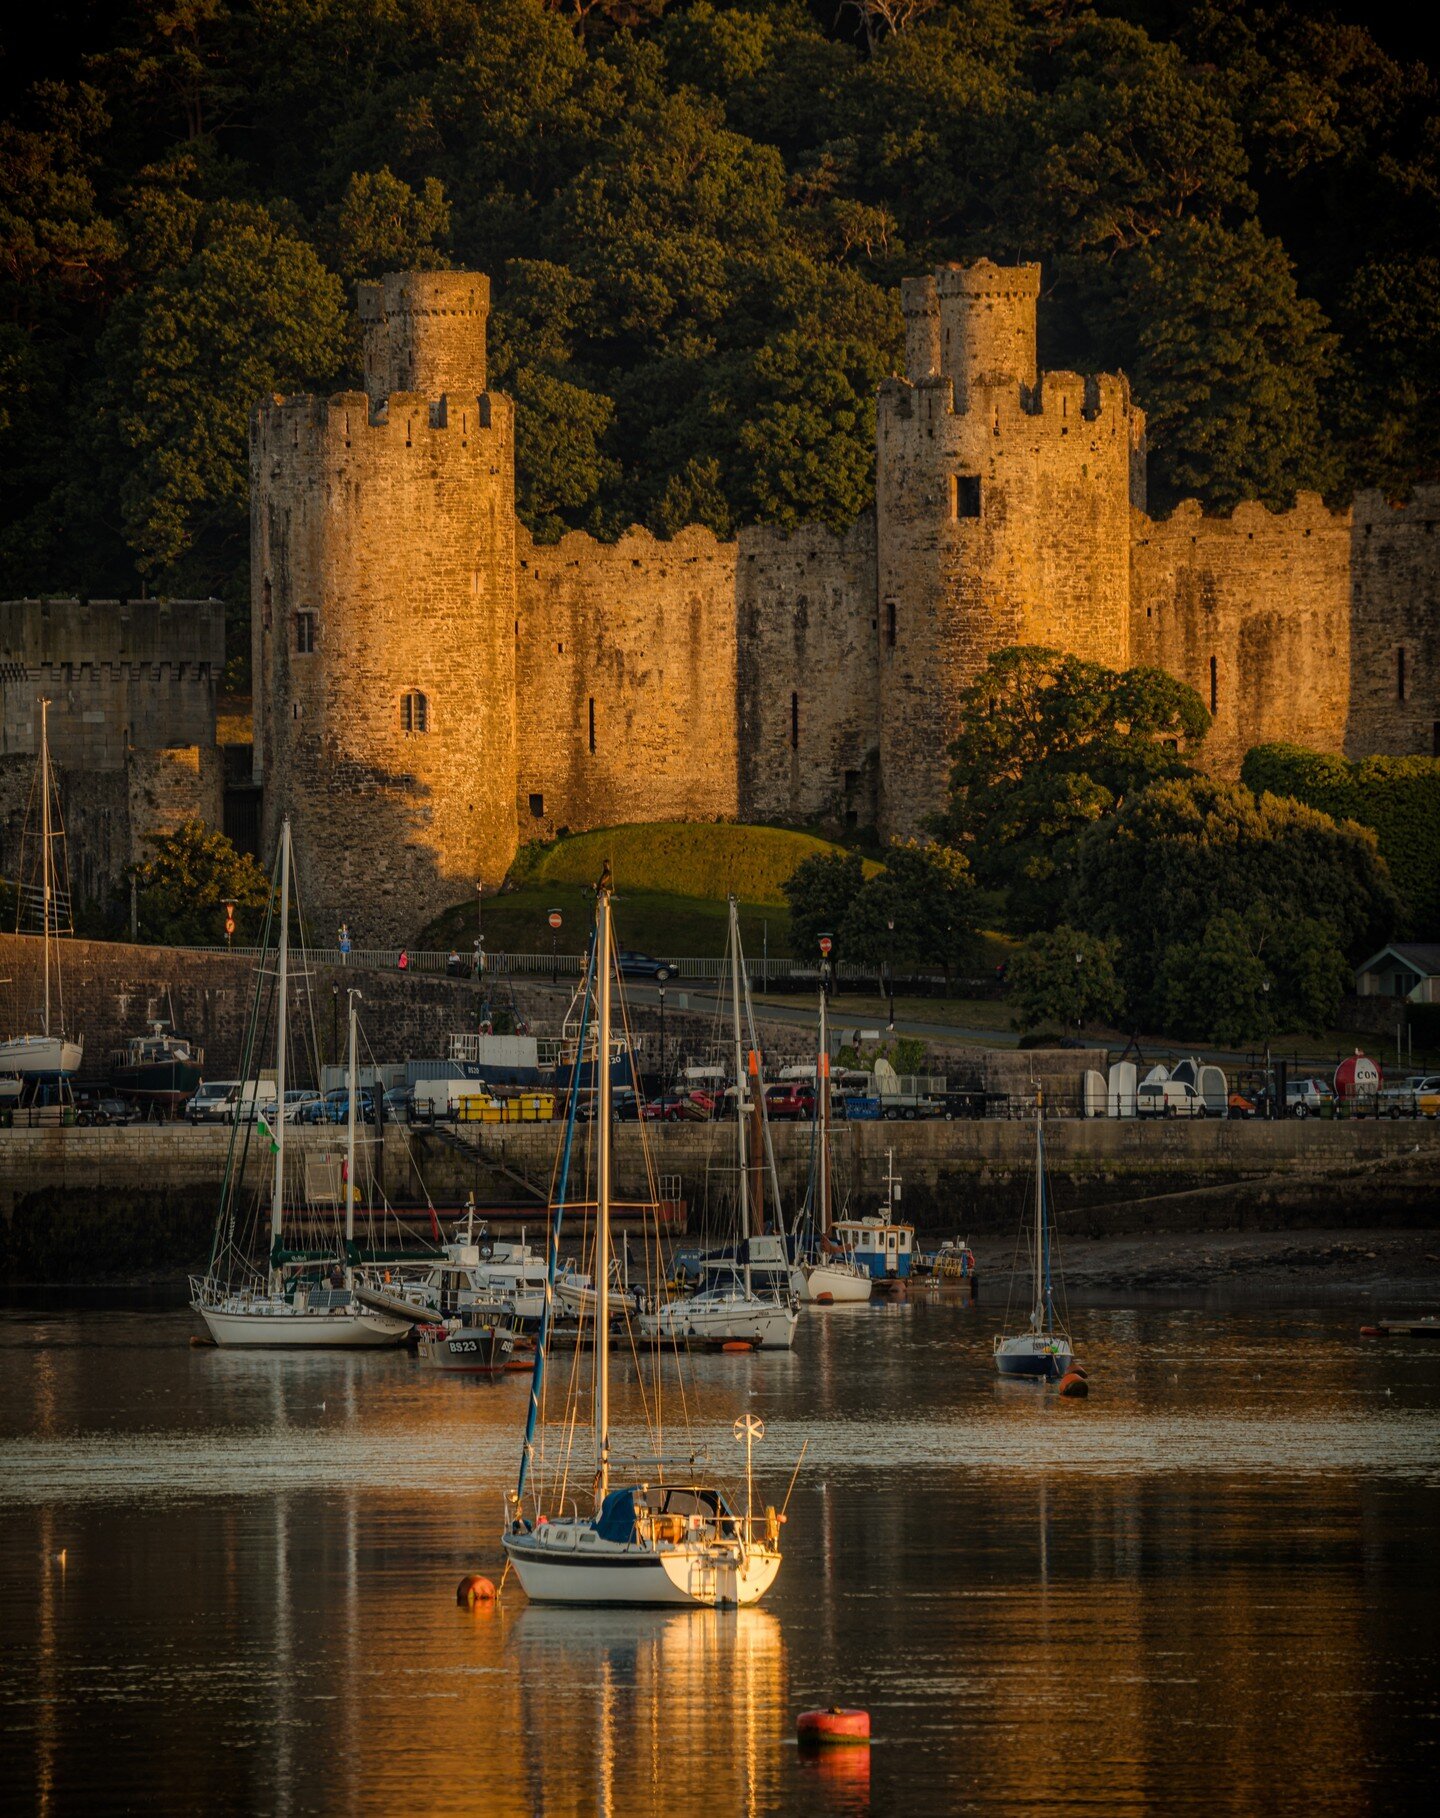 Last rays of the day shining on Conwy castle this evening.
-
-
-
-
-
-
#northwales 
#northwalestagram 
#northwalescoast 
#northwalesinstagram 
#conwy 
#conwycastle 
#yachts 
#goldenhour 
#sonya7iii 
#tamron150500